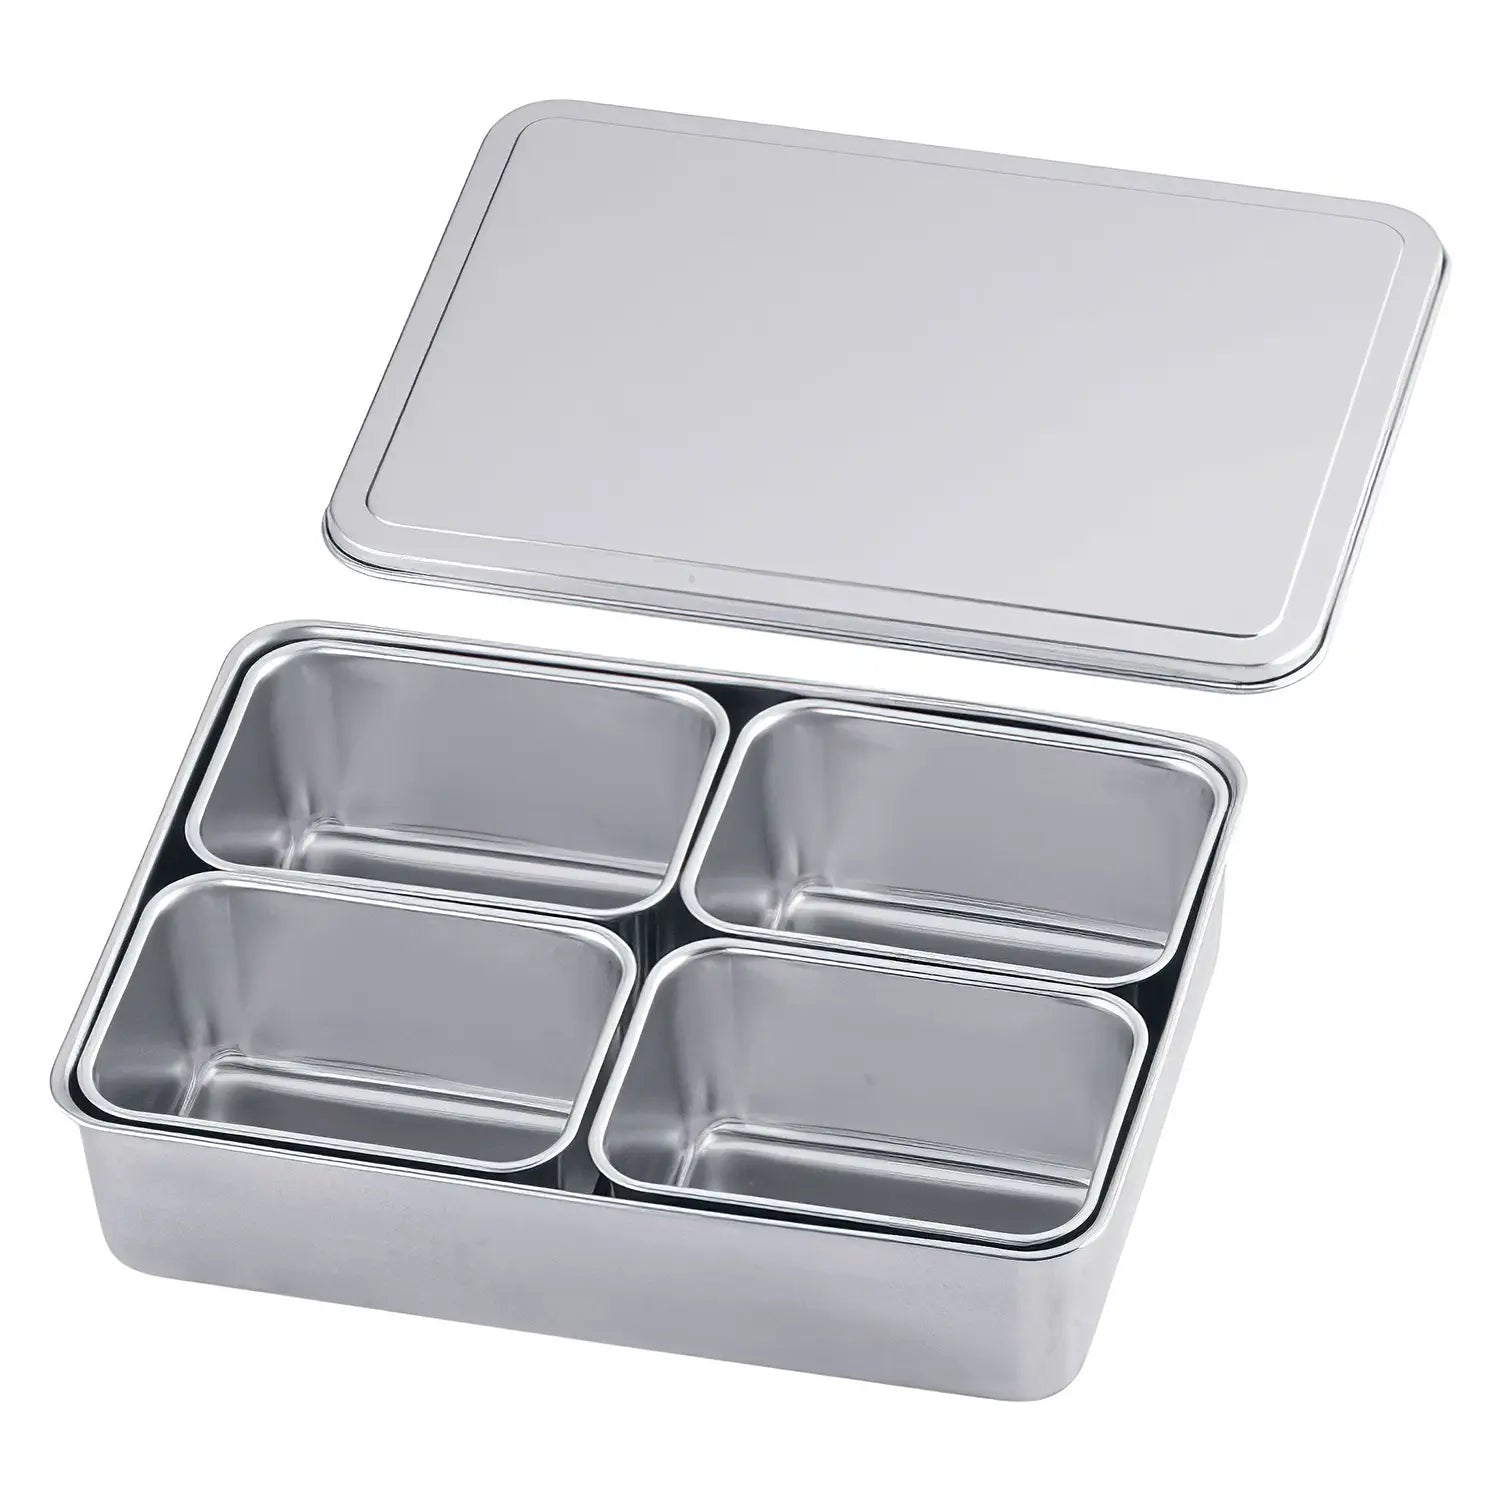 Clover Stainless Steel Yakumi Seasoning Container 8 Compartments Squar